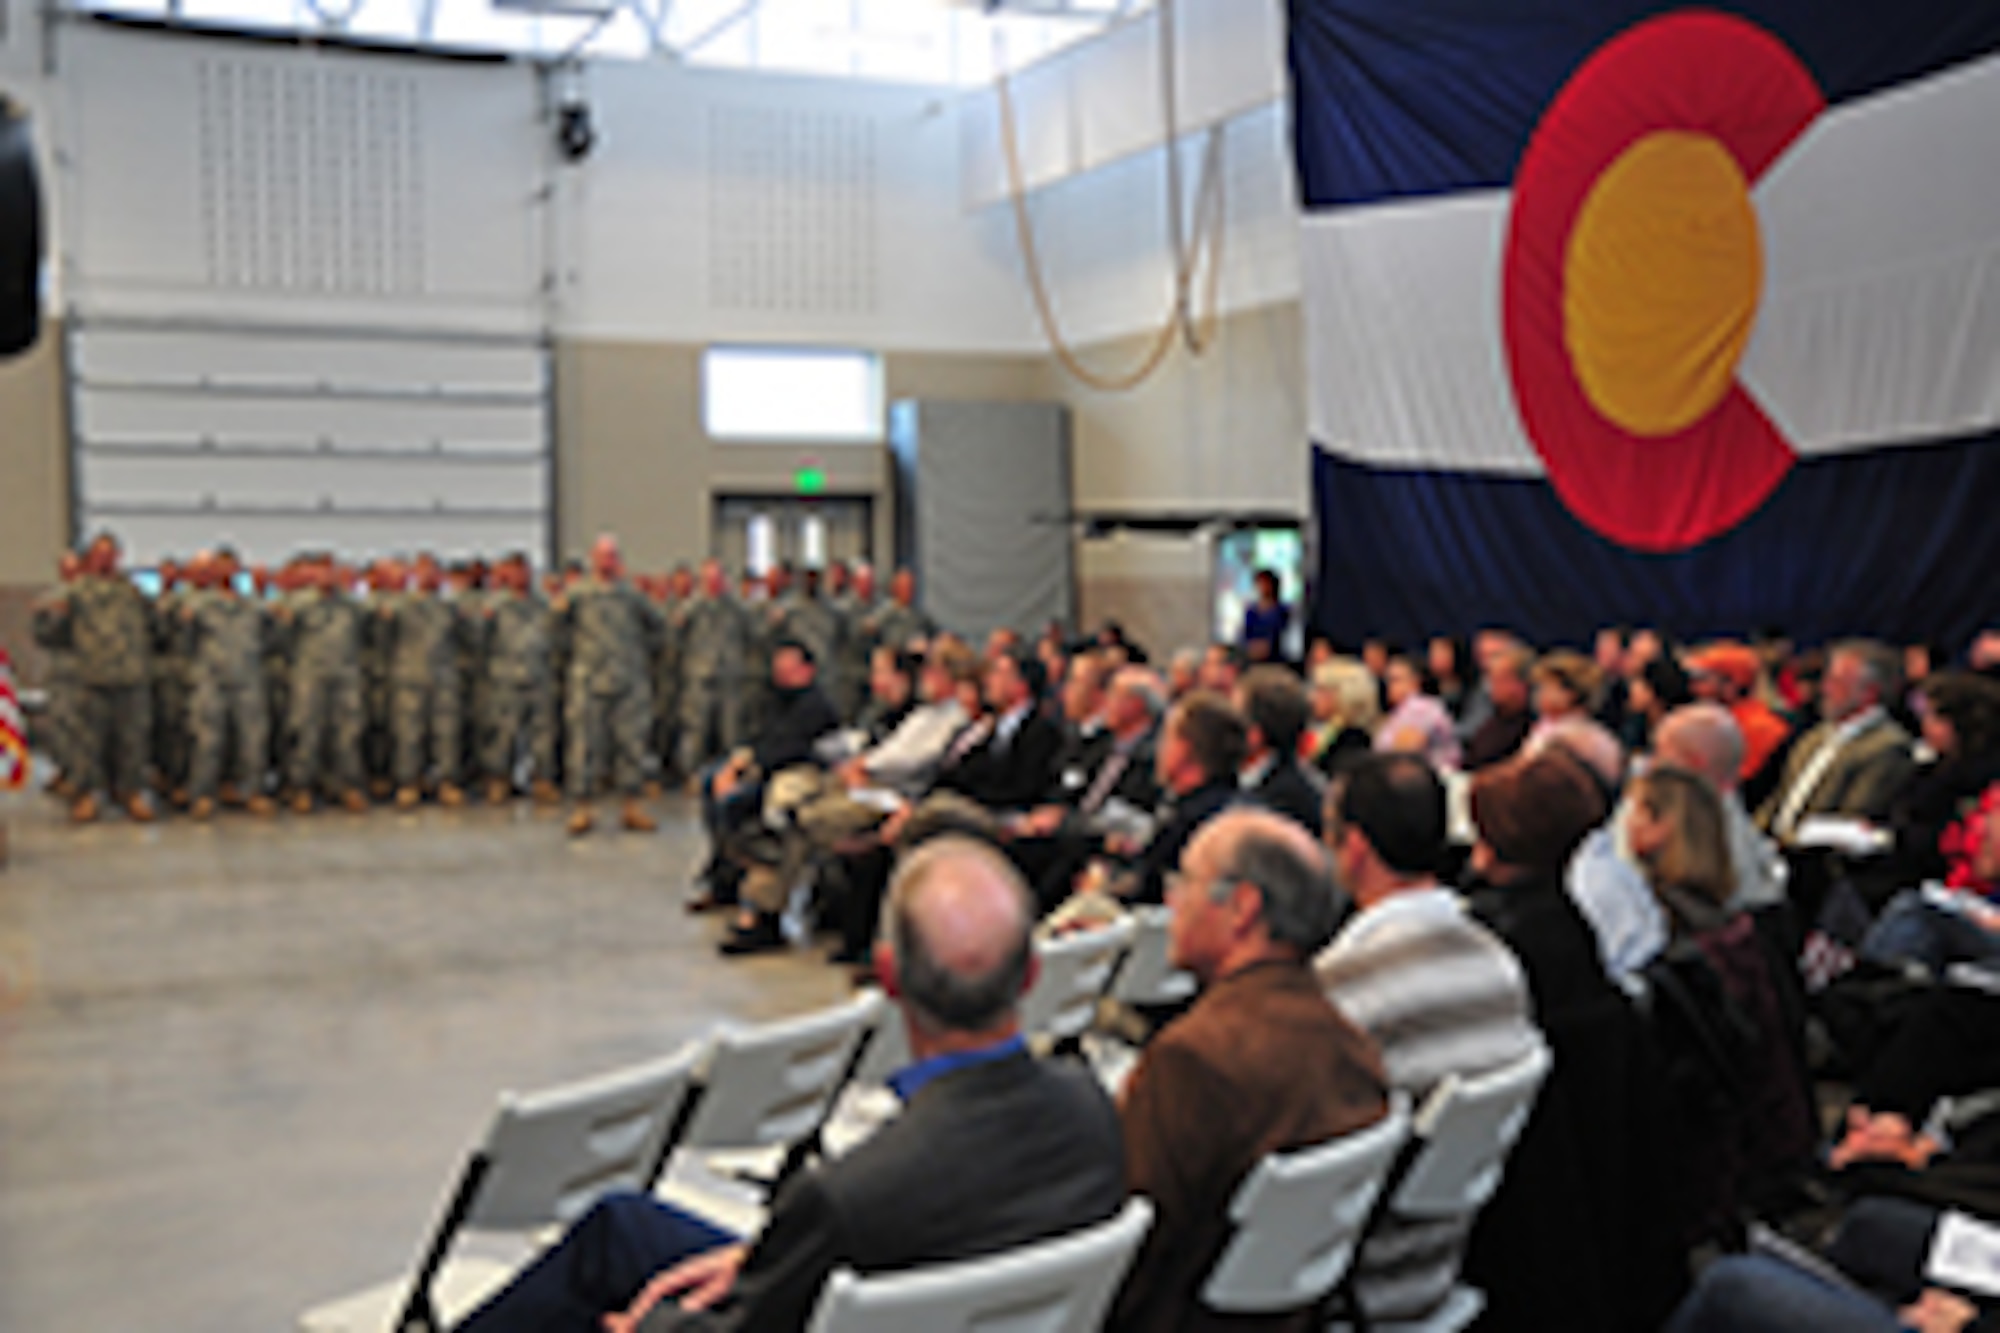 The Colorado Army National Guard opened its newest readiness center in Windsor, Colo., Oct. 13, 2012. The 17-acre facility is the home of approximately 130 Soldiers in the 1157th Forward Support Company of the 1st Battalion, 157th Infantry Regiment. (Official Army National Guard photo by 2nd Lt. Skye A. Robinson/RELEASED)
